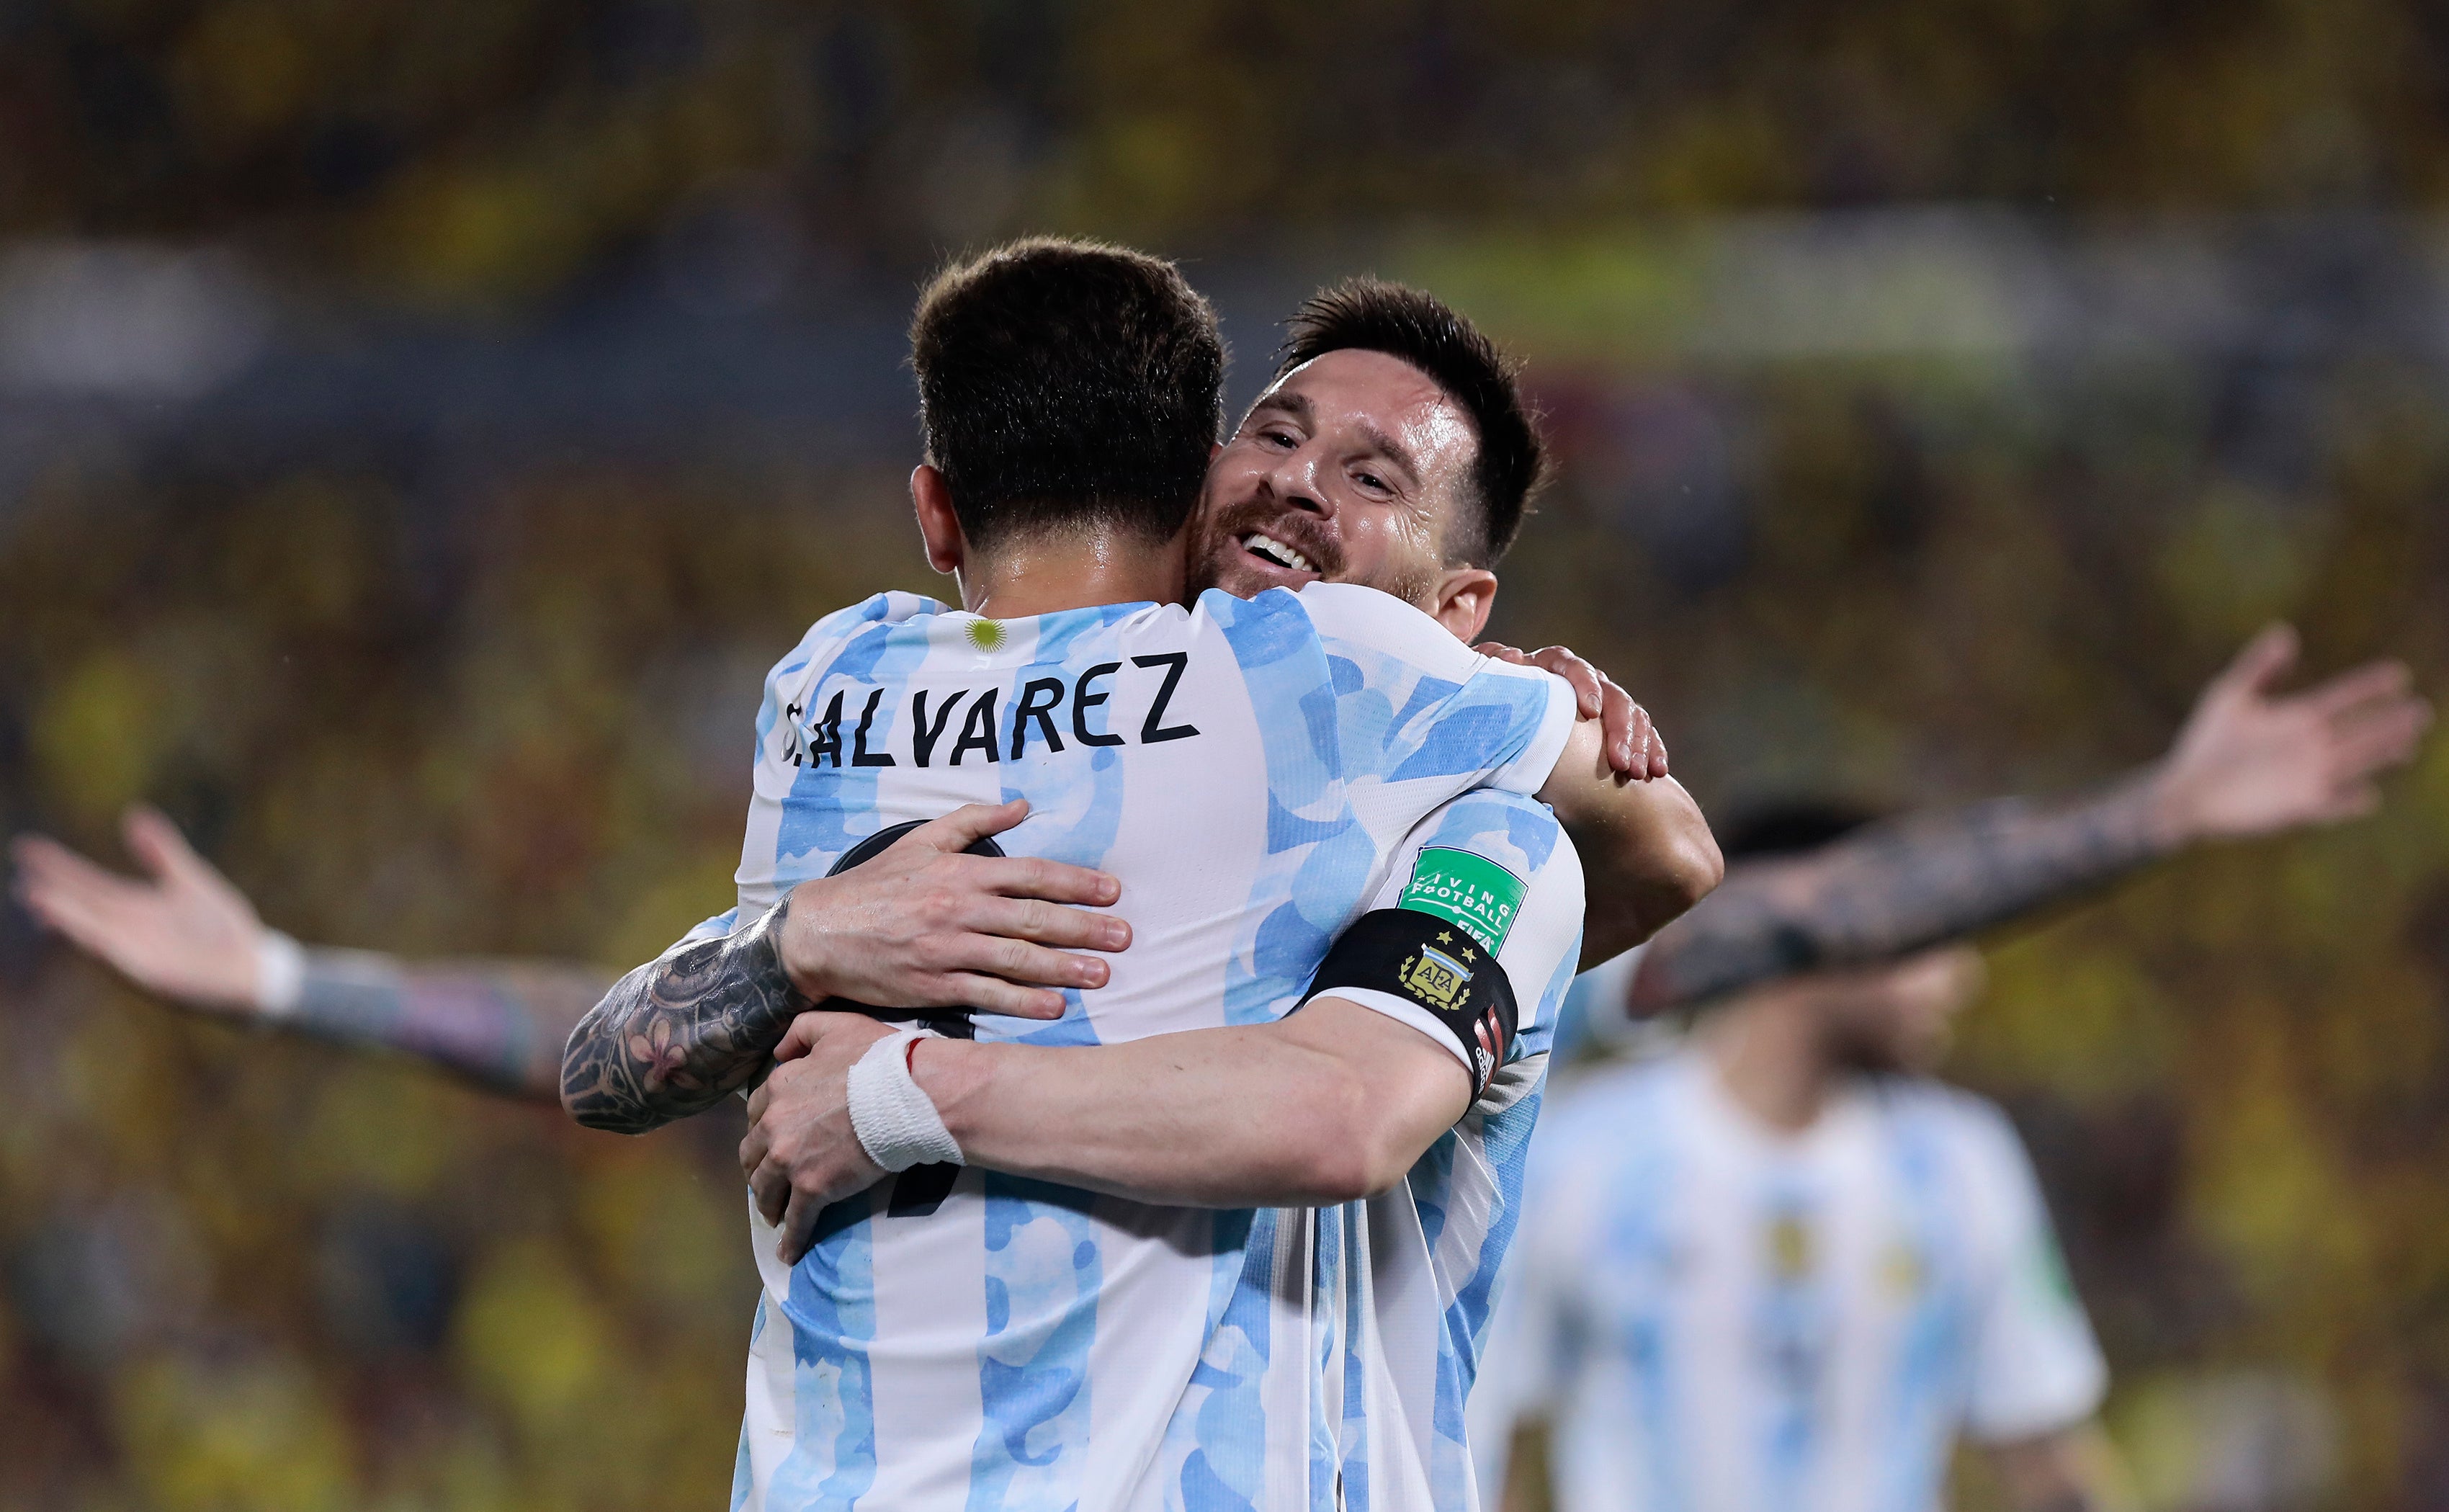 Lionel Messi will want to finally win a World Cup for Argentina